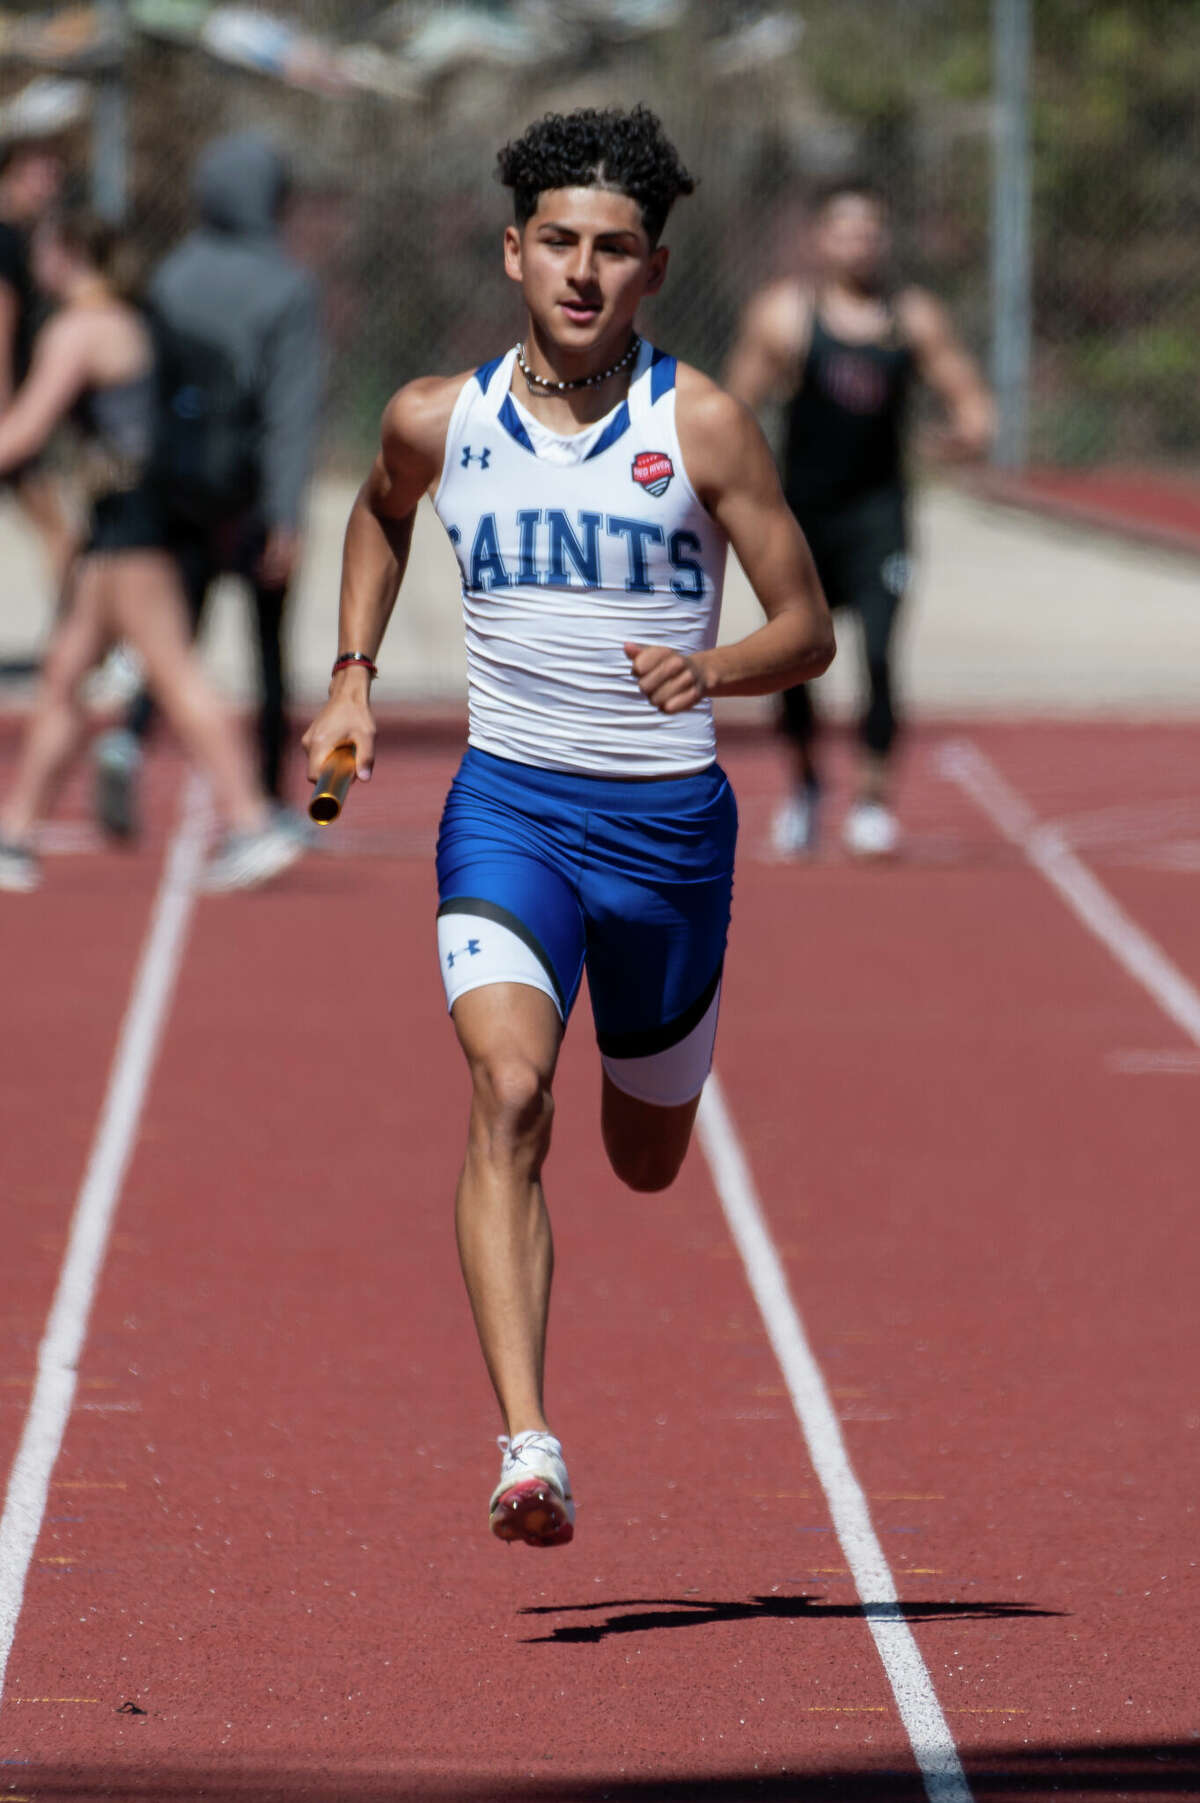 Alexander graduate and current Our Lady of Lake middle-distance runner Julian Verastegui has qualified for a national meet in his first year running in college.